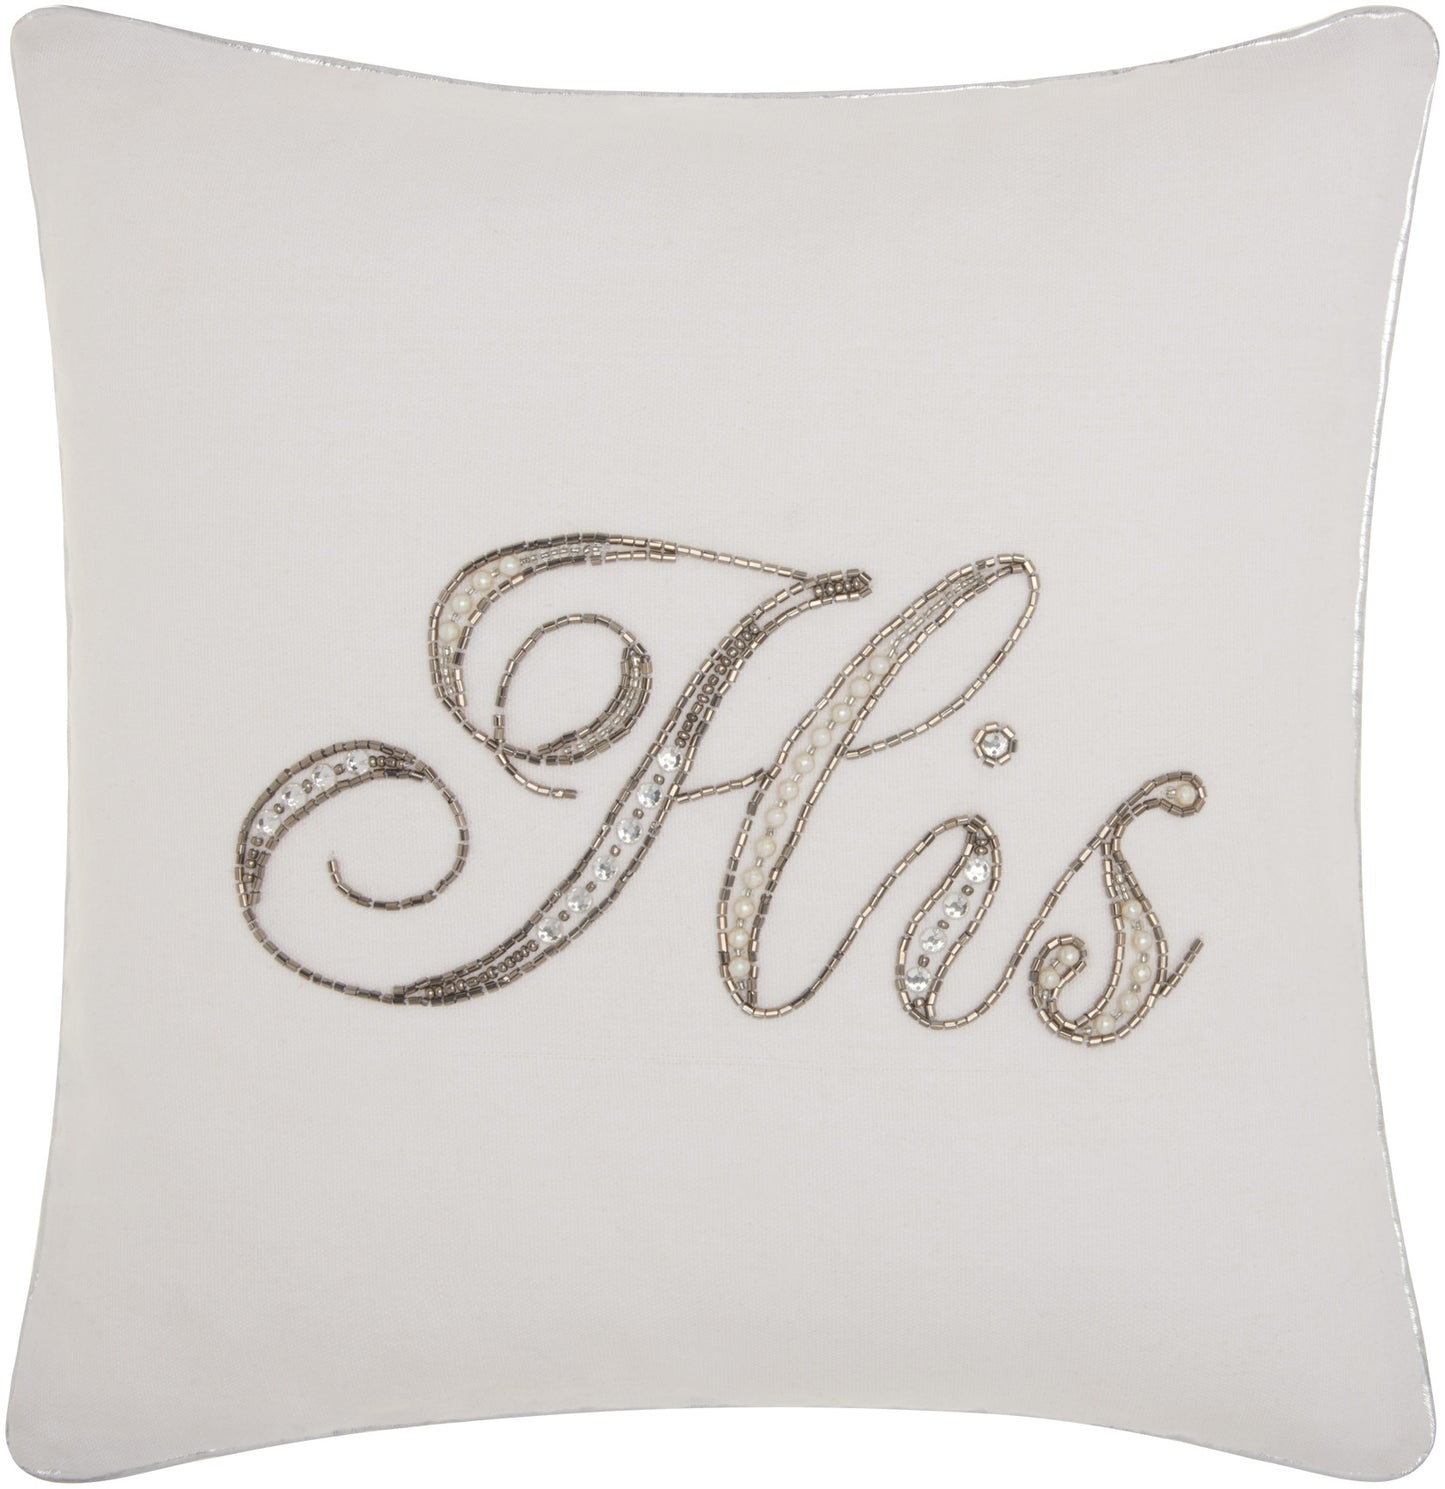 Kathy Ireland Pillow E7811 Cotton Beaded His Throw Pillow From Kathy Ireland By Nourison Rugs